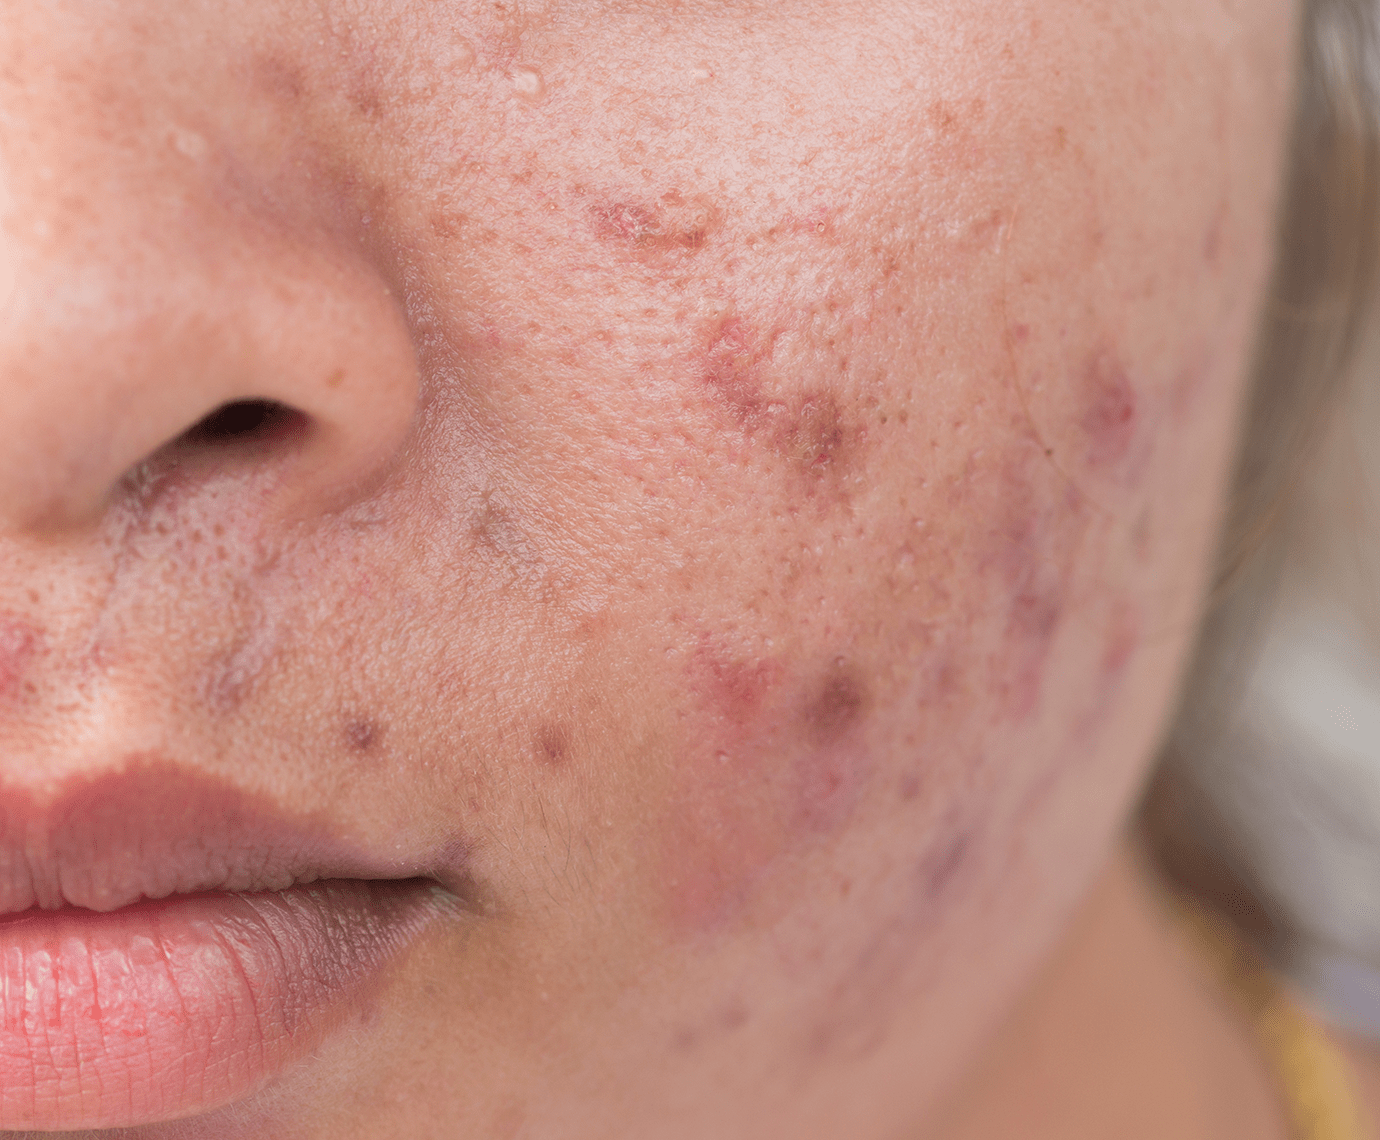 close up image of pimple marks